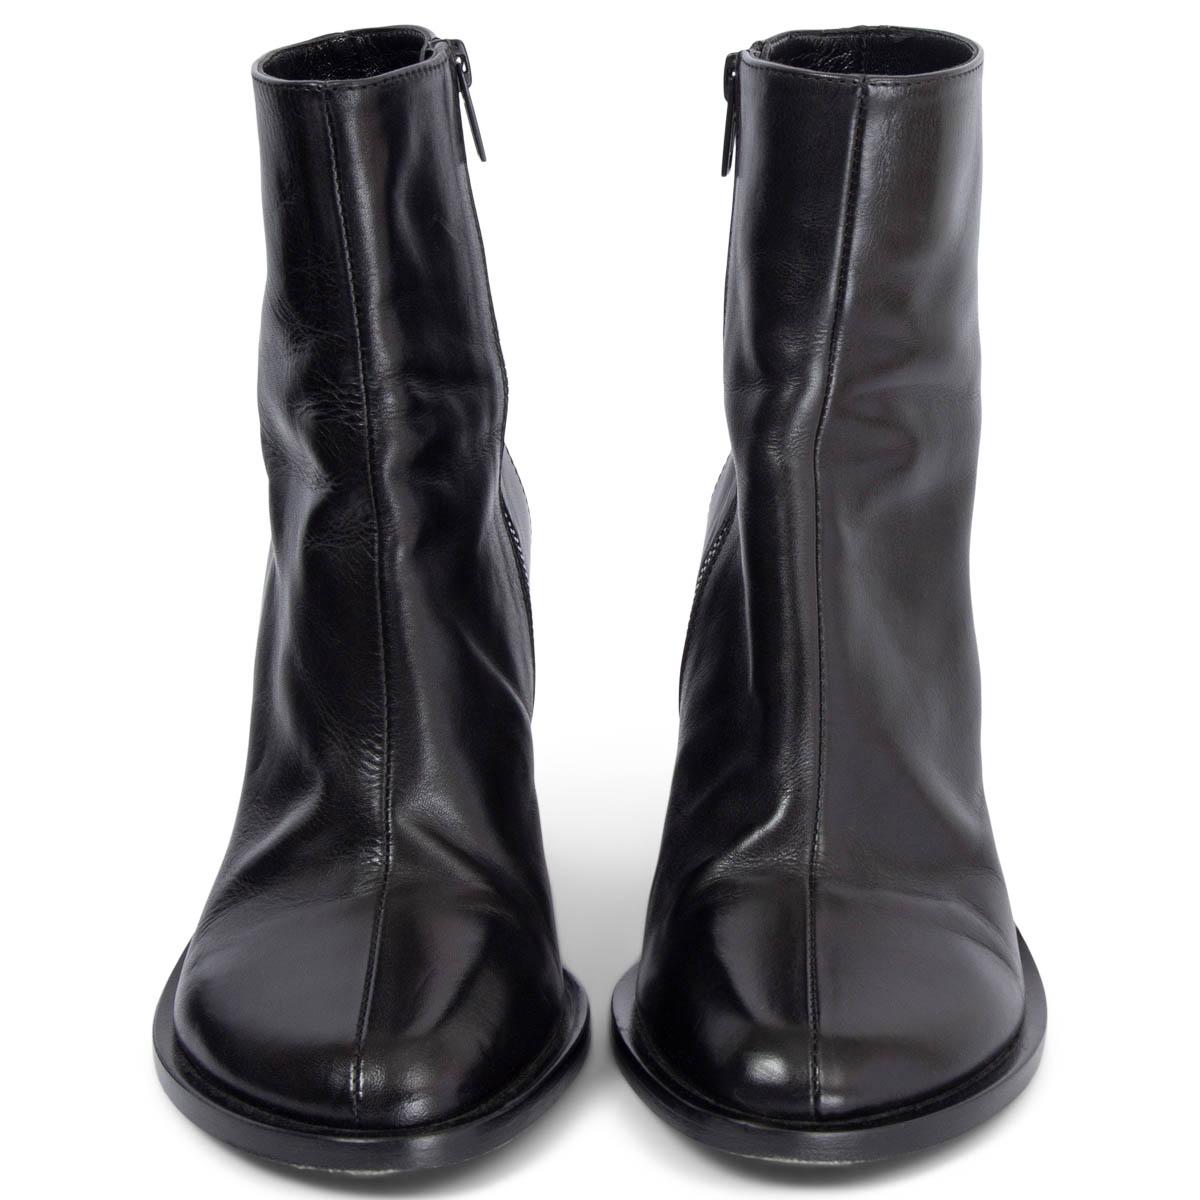 100% authentic Ann Demeulemeester Wally chelsea boots in black smooth calfskin with elastic inserts and a chunky rubber sole. Have been worn and are in excellent condition. 

Measurements
Imprinted Size	38
Shoe Size	38
Inside Sole	25cm